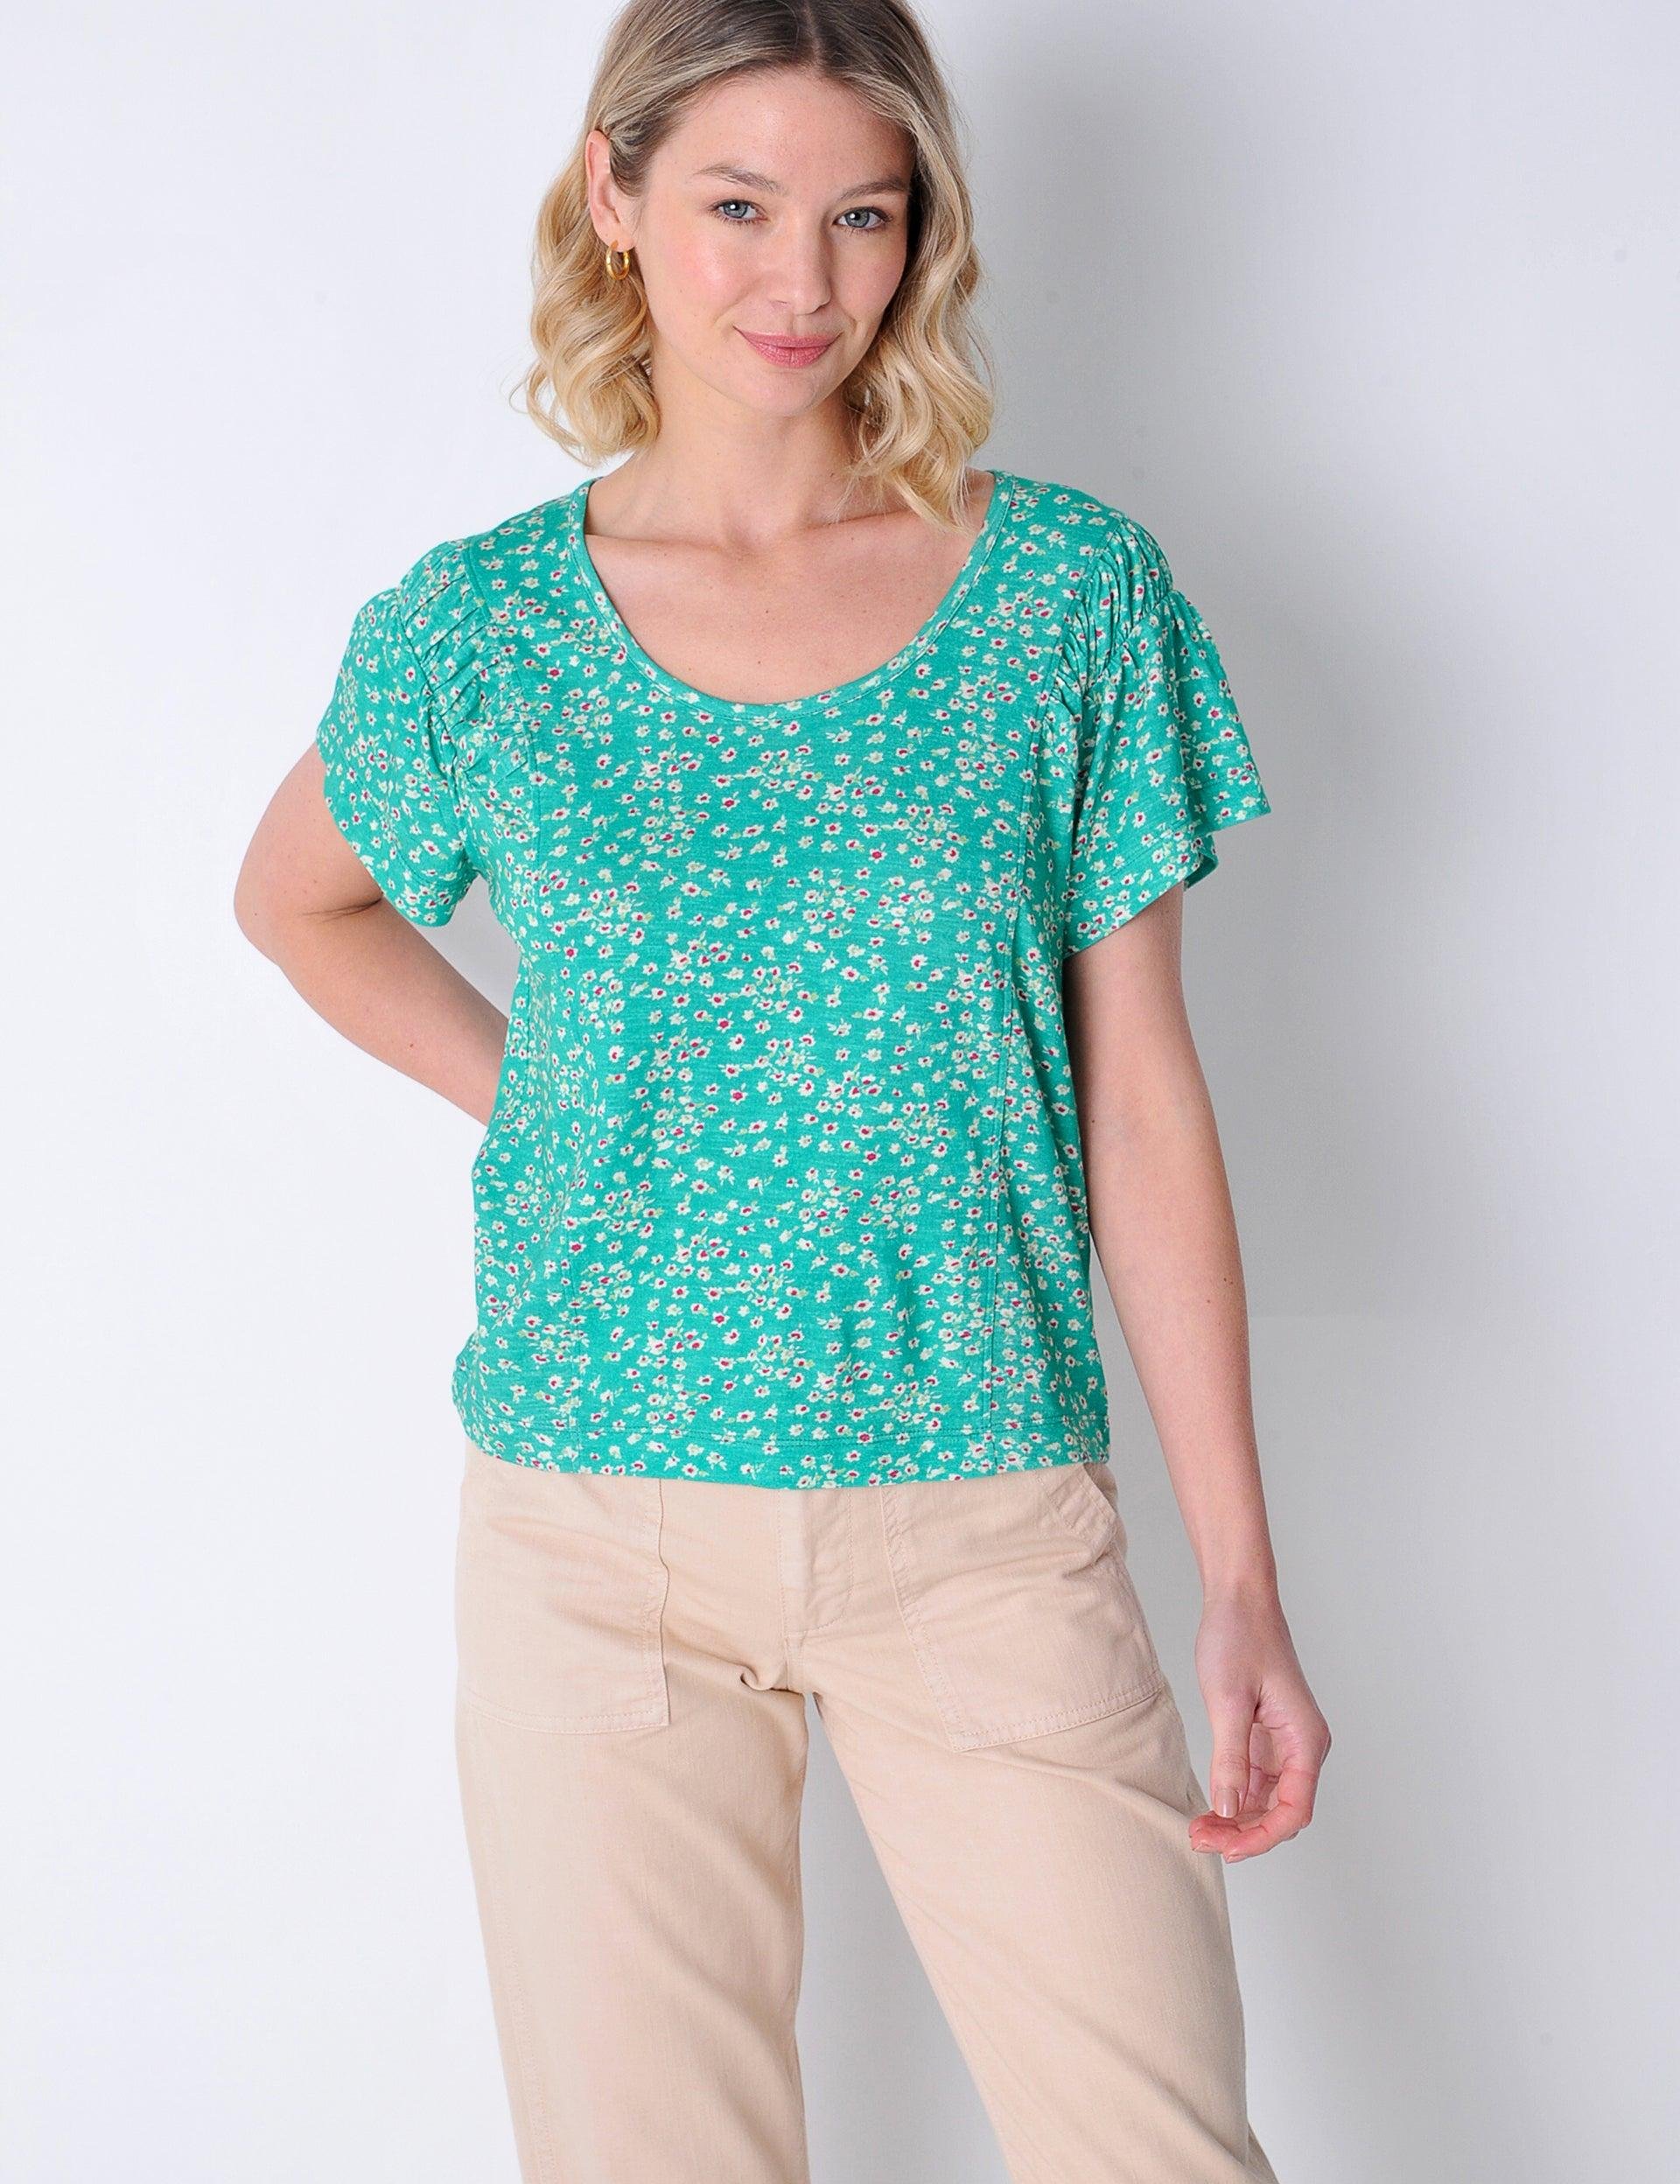 Quoit Top in Apple Green by BURGS